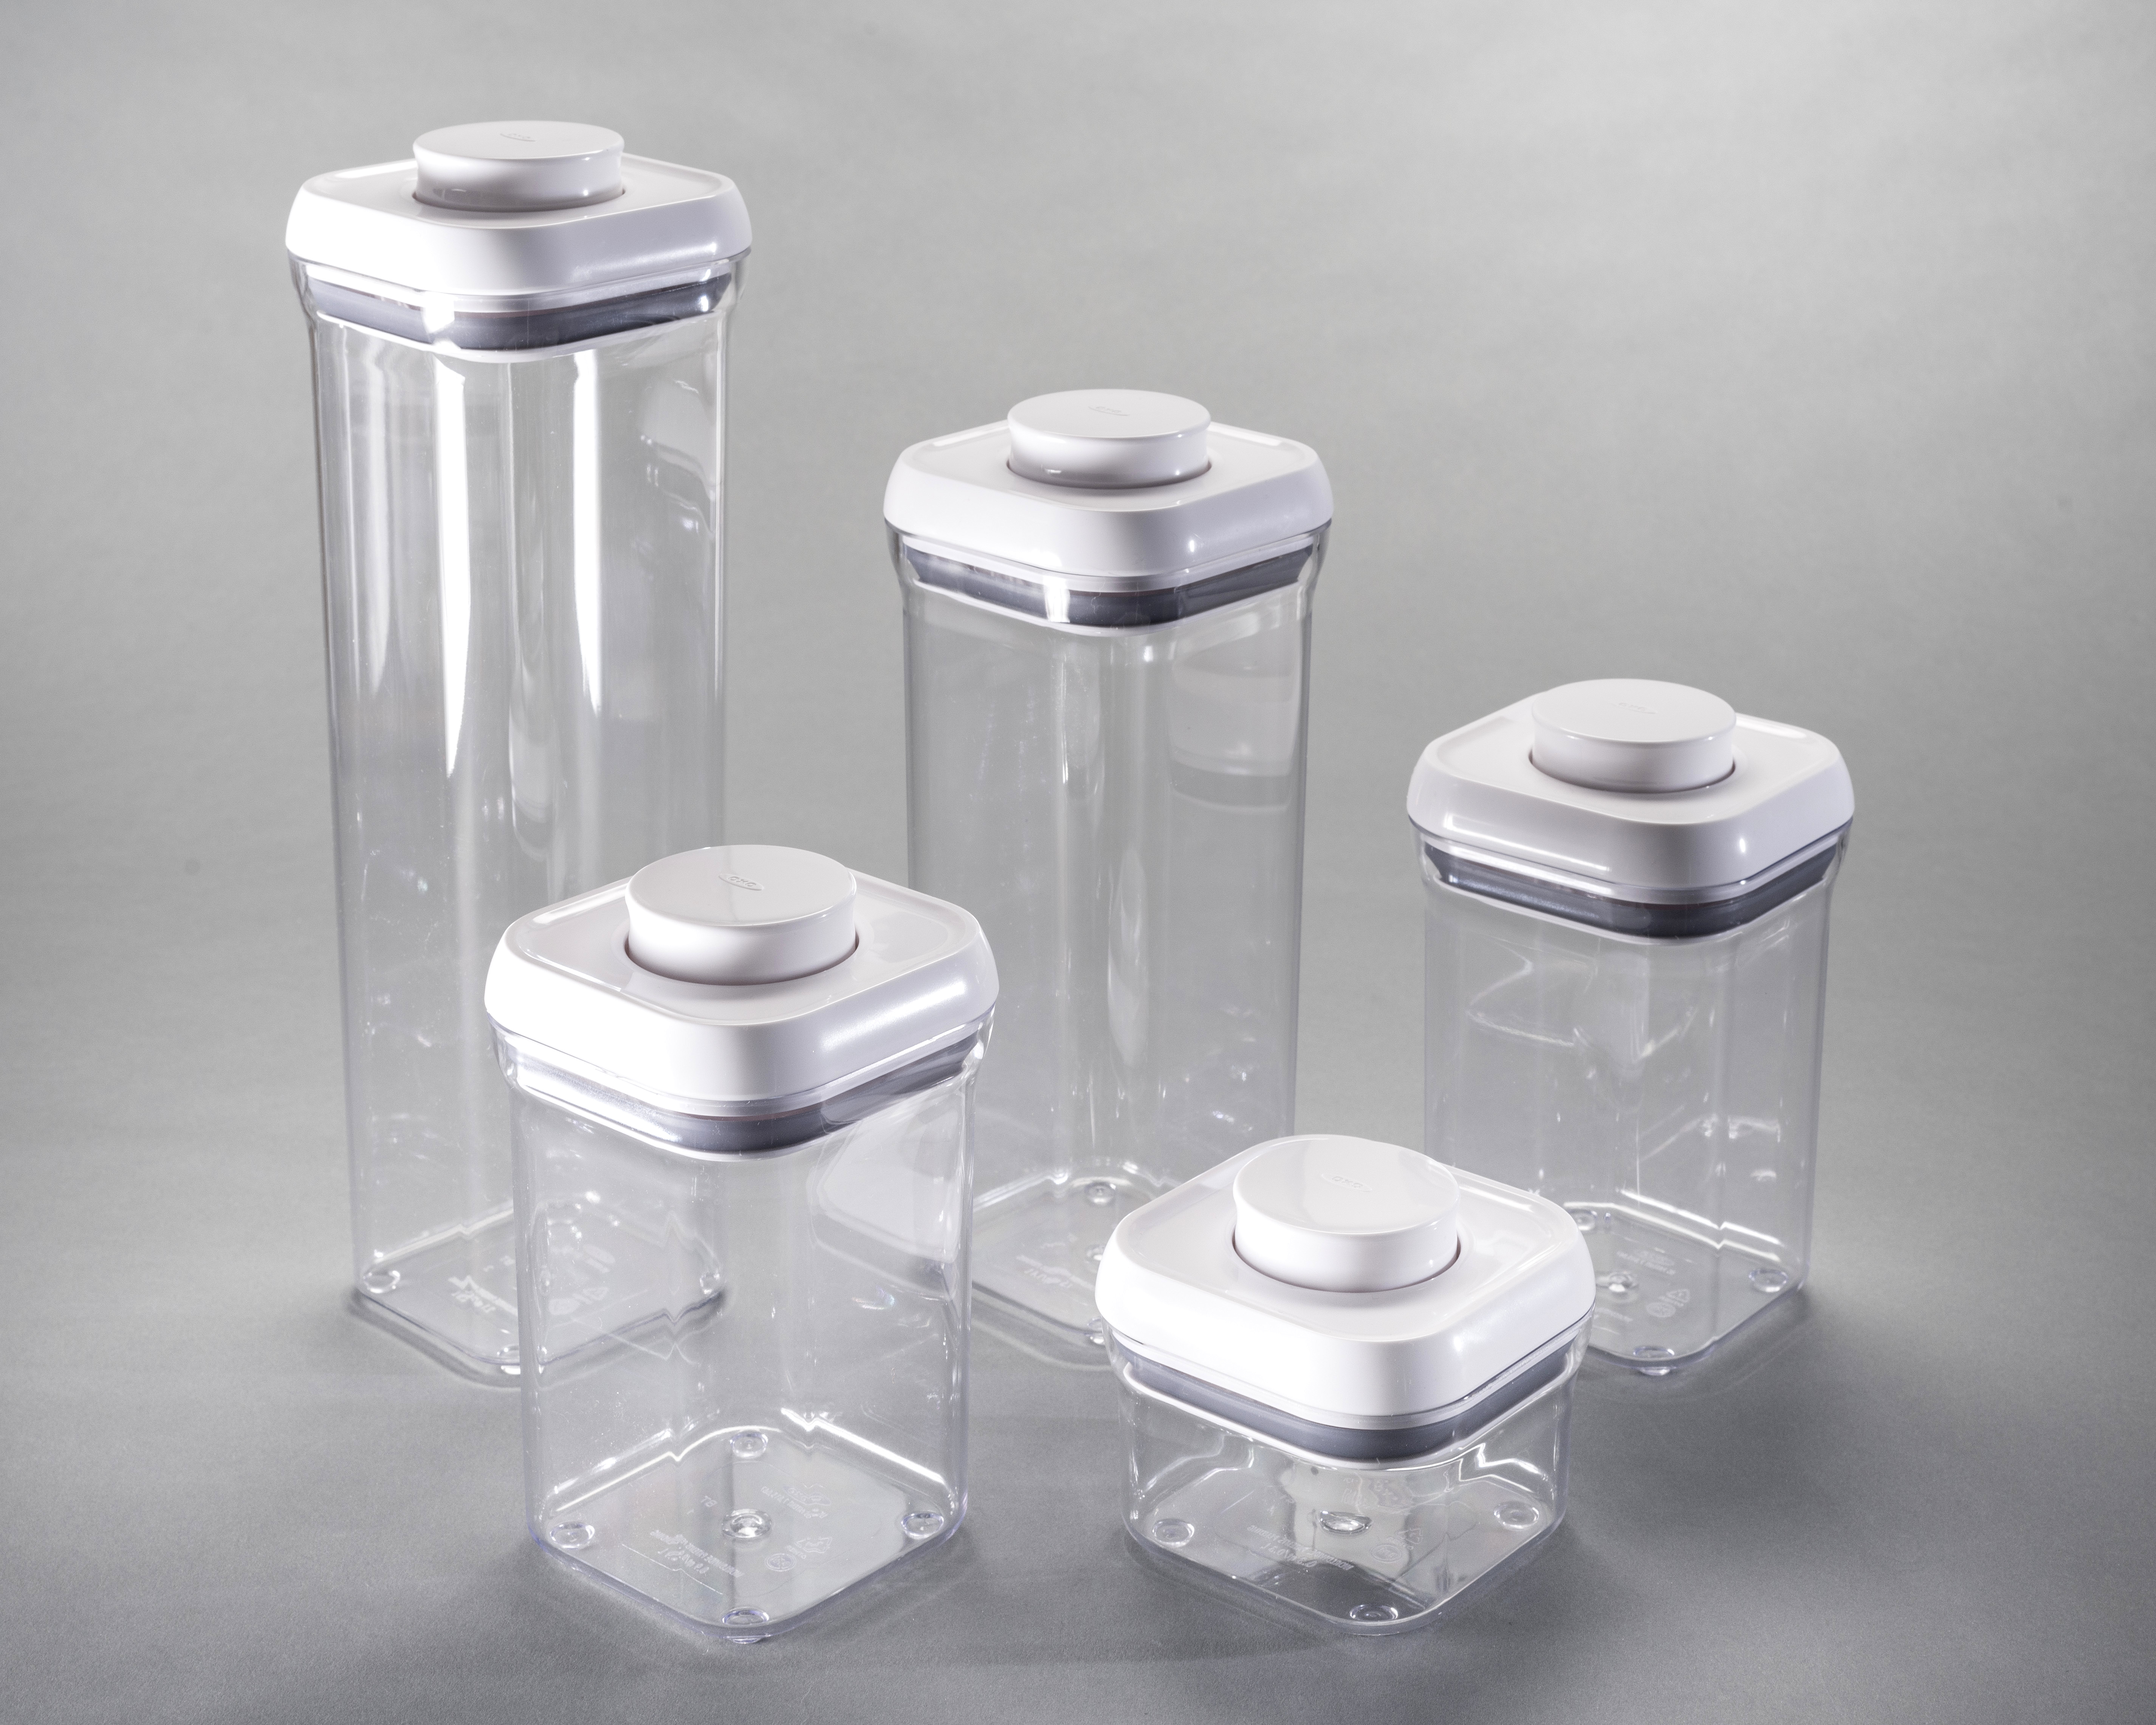 Set of rectangular, stackable, clear plastic containers with white lids.